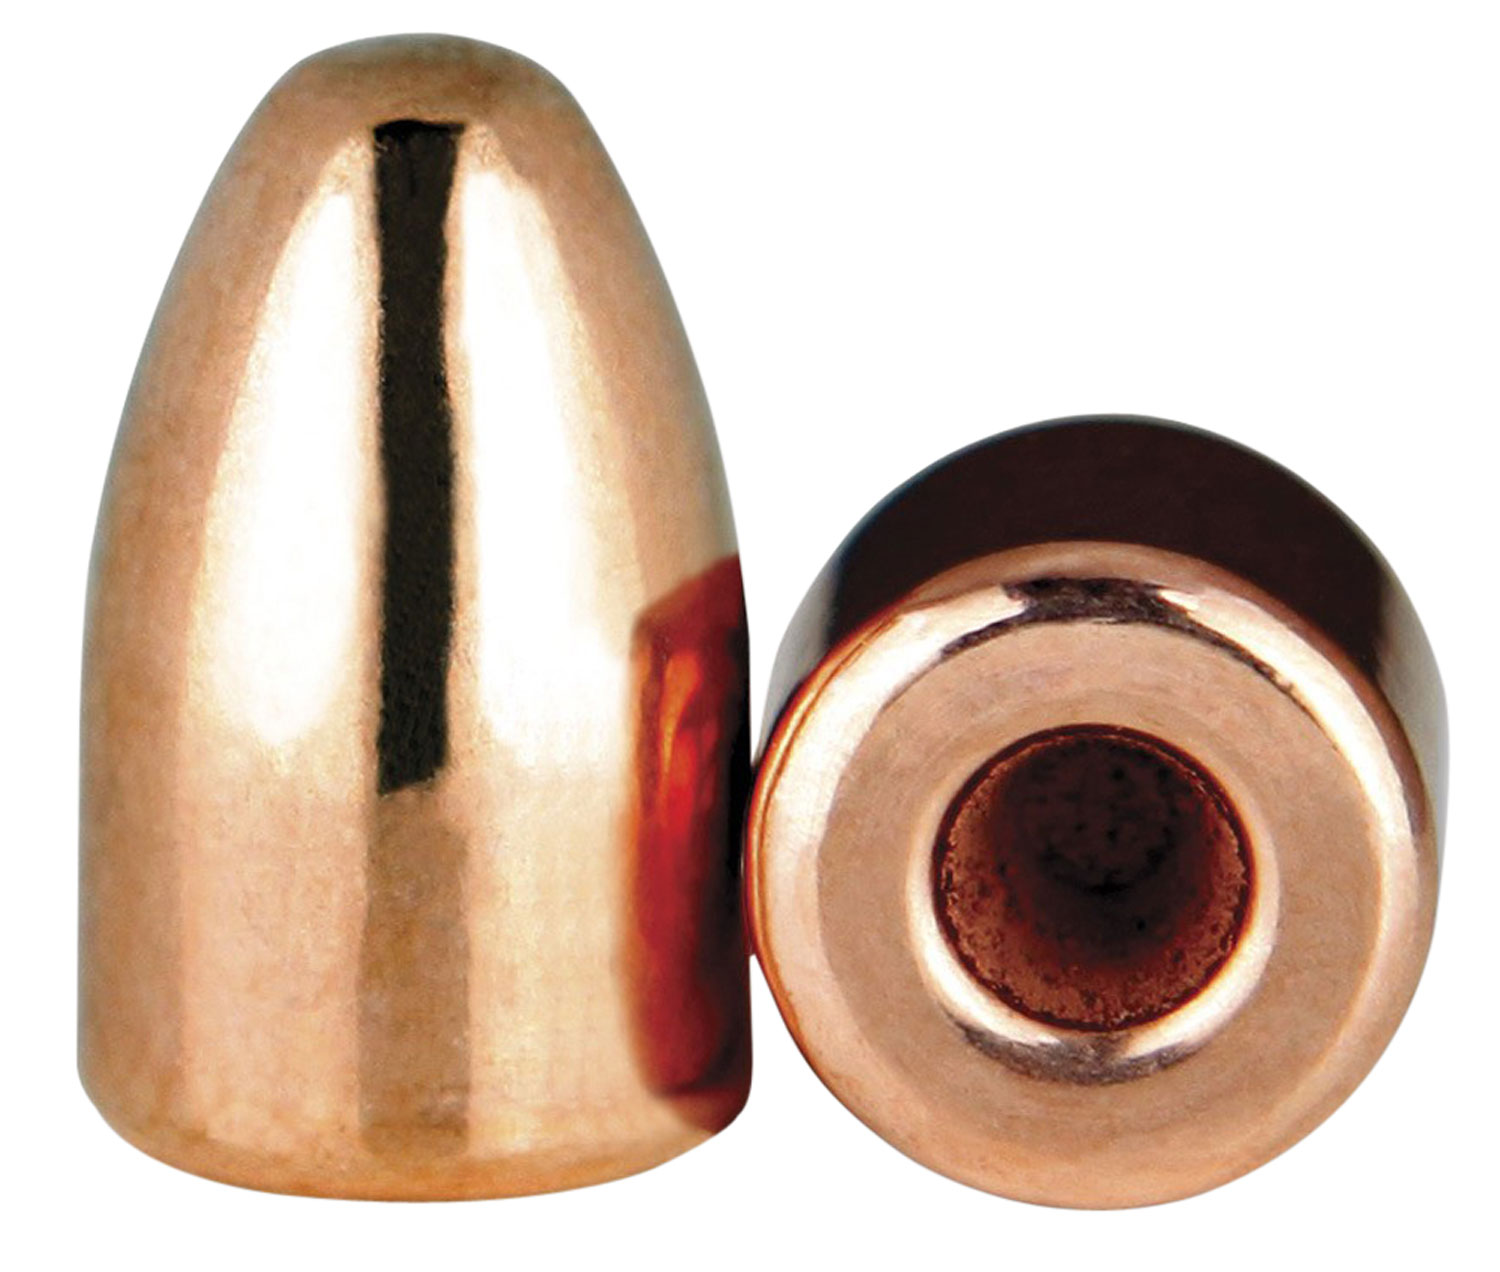 Berrys 15143 Superior Pistol  9mm .356 124 GR Hollow Base Round Nose Thick Plate 250 Per Box